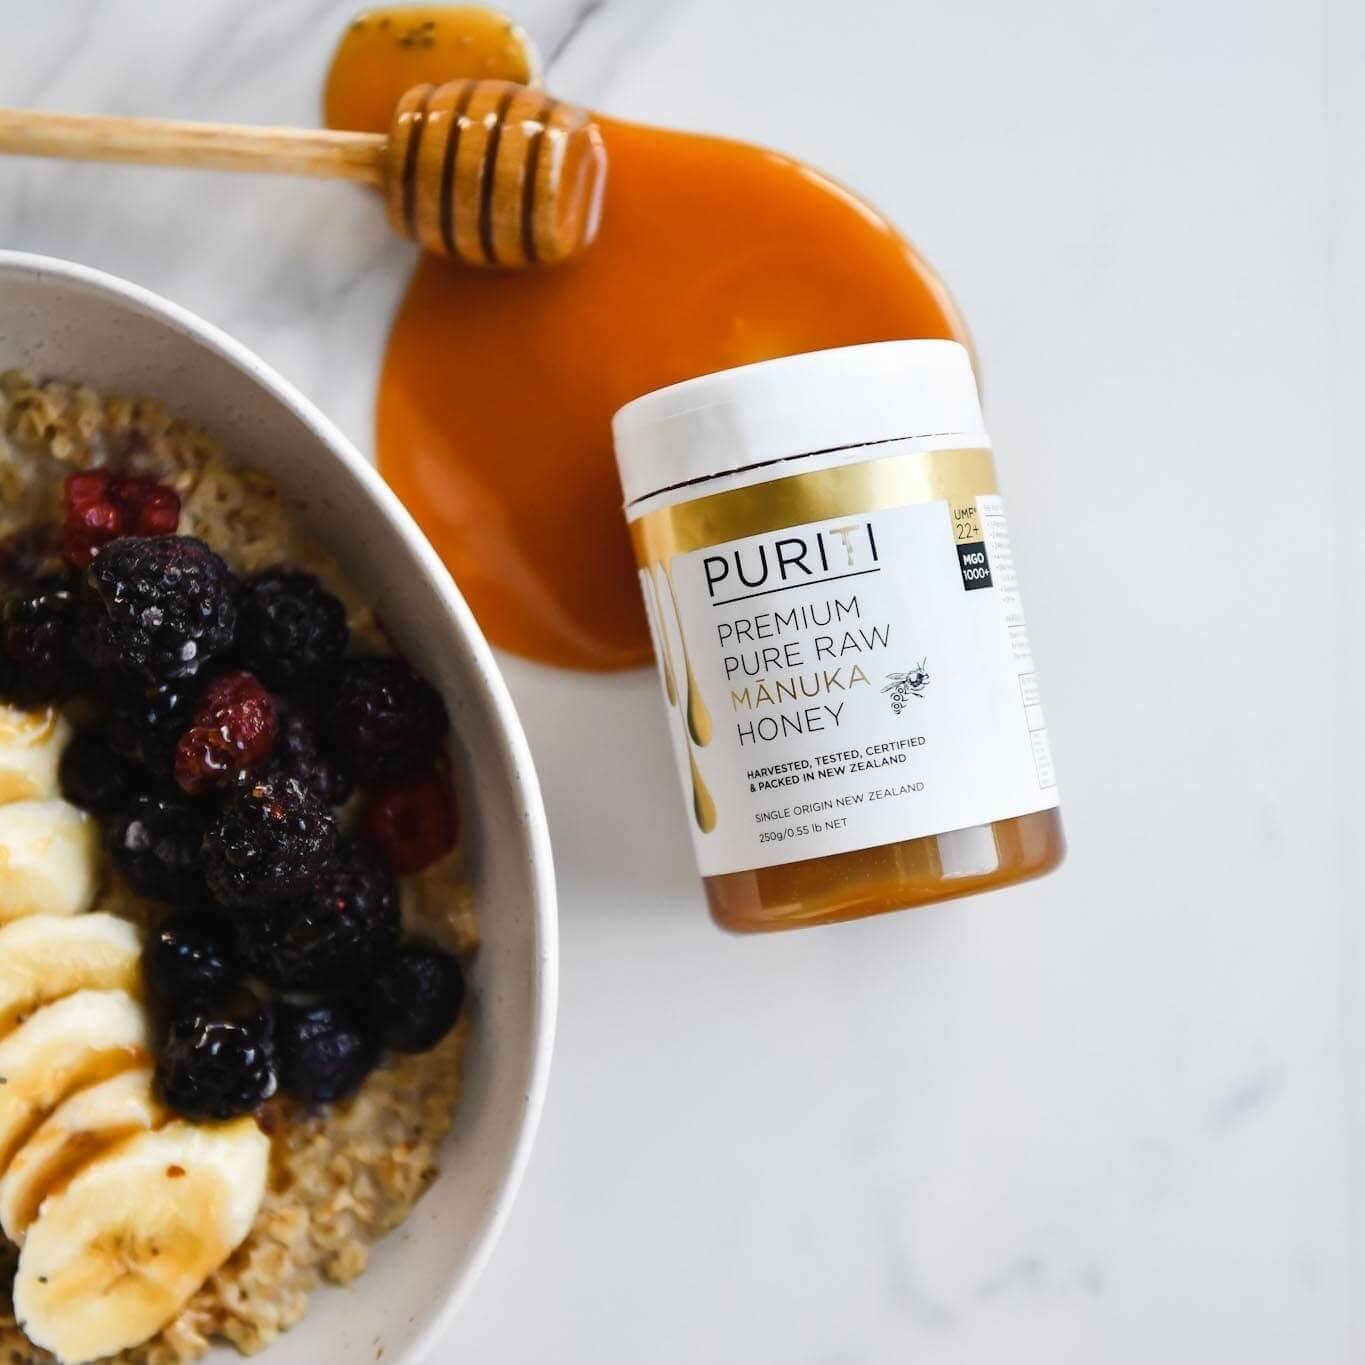 Puriti Manuka Honey and a bowl of delicious cereal